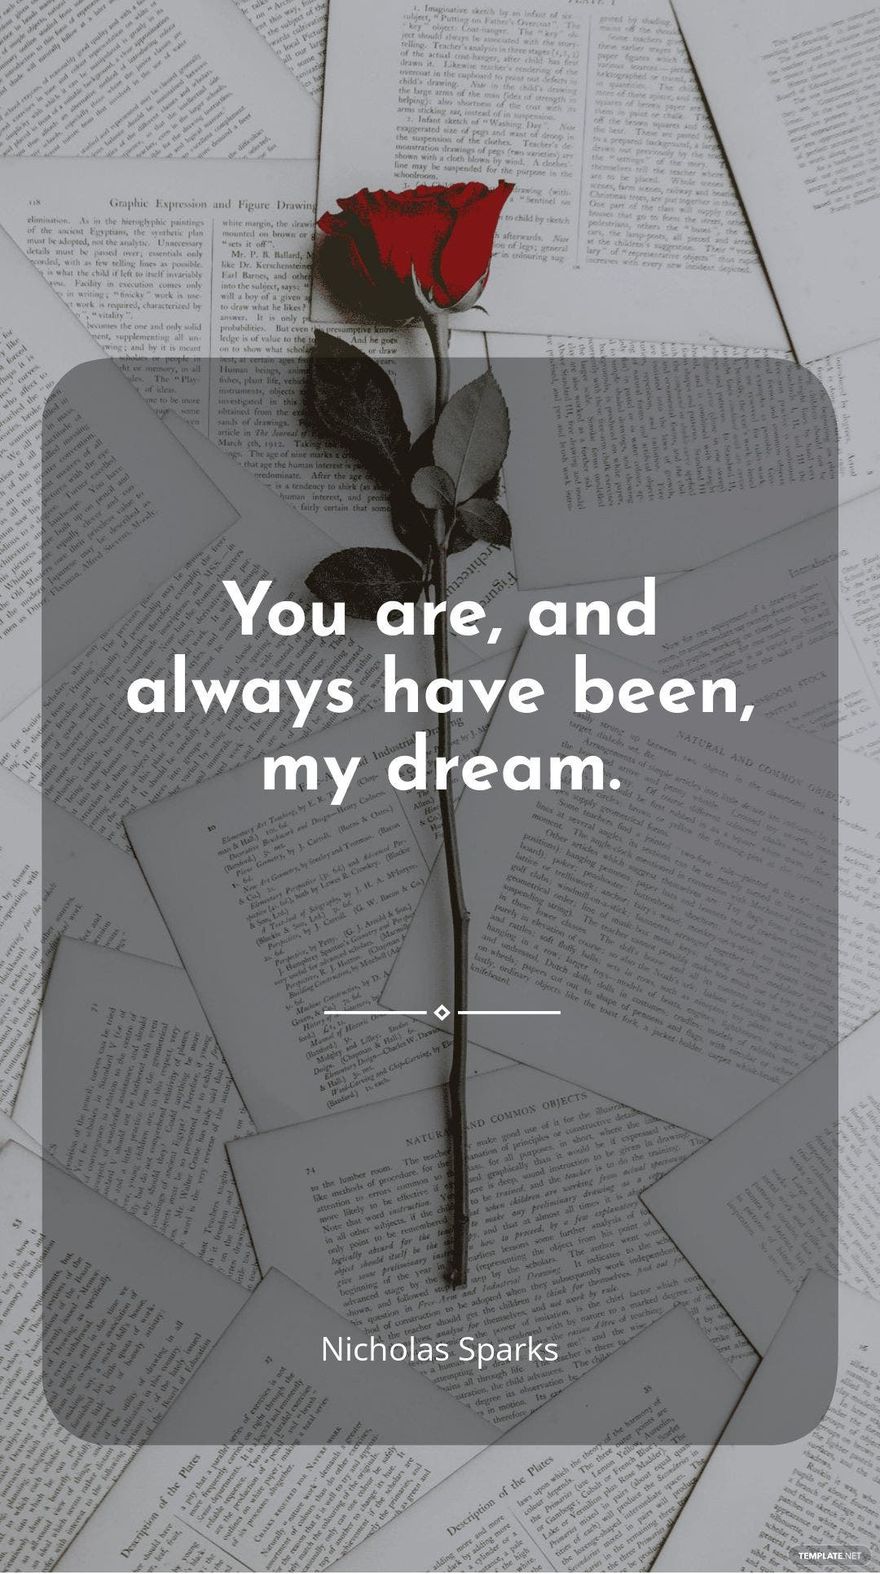 Nicholas Sparks - “You are, and always have been, my dream.”